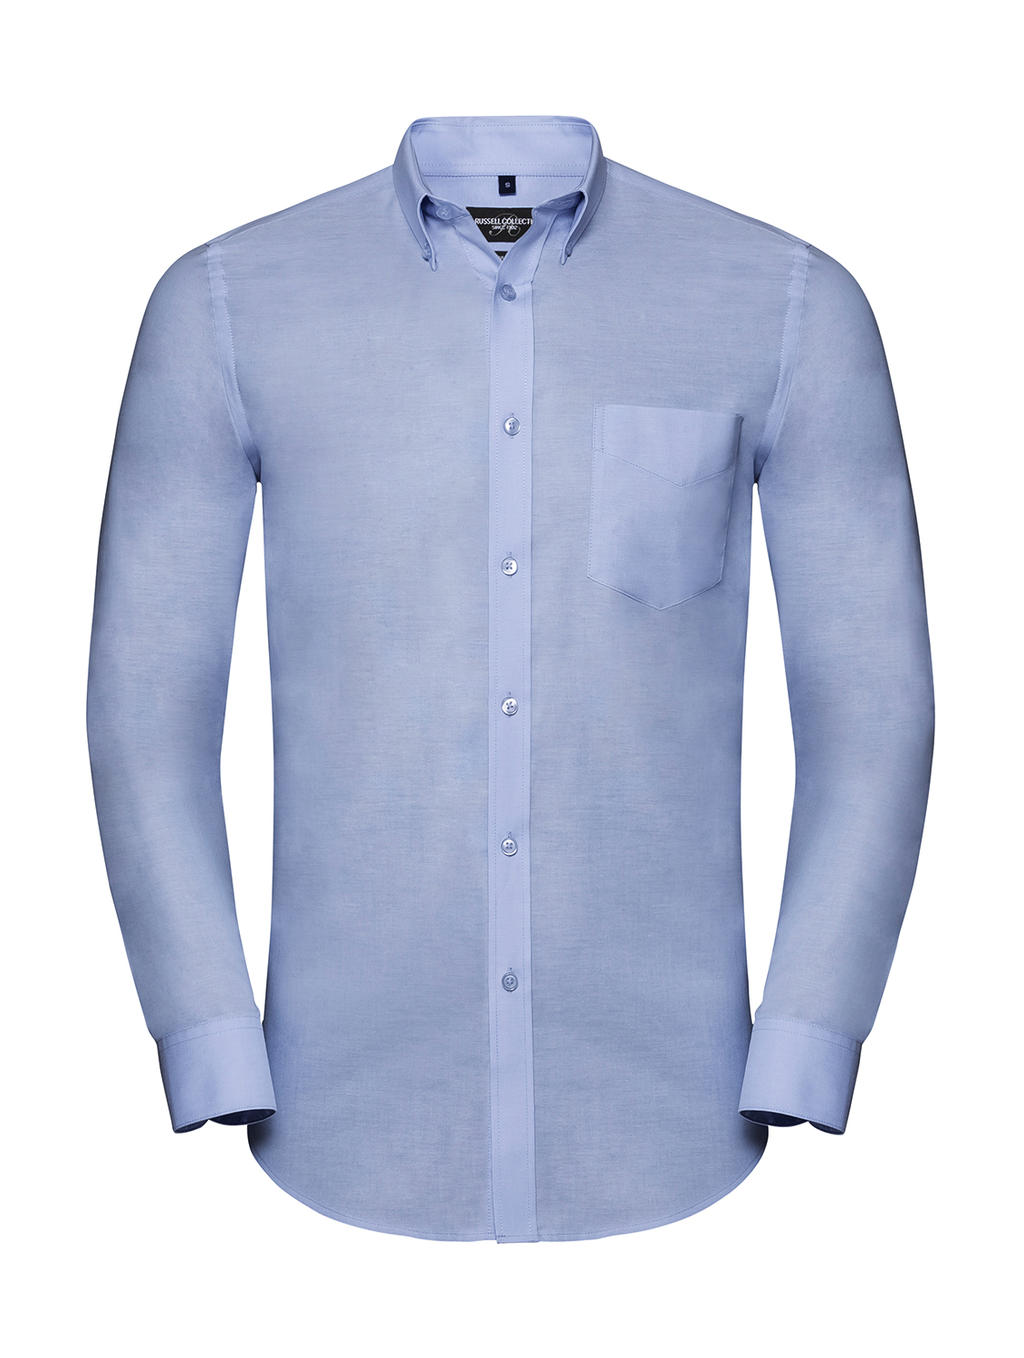  Mens LS Tailored Button-Down Oxford Shirt in Farbe Oxford Blue